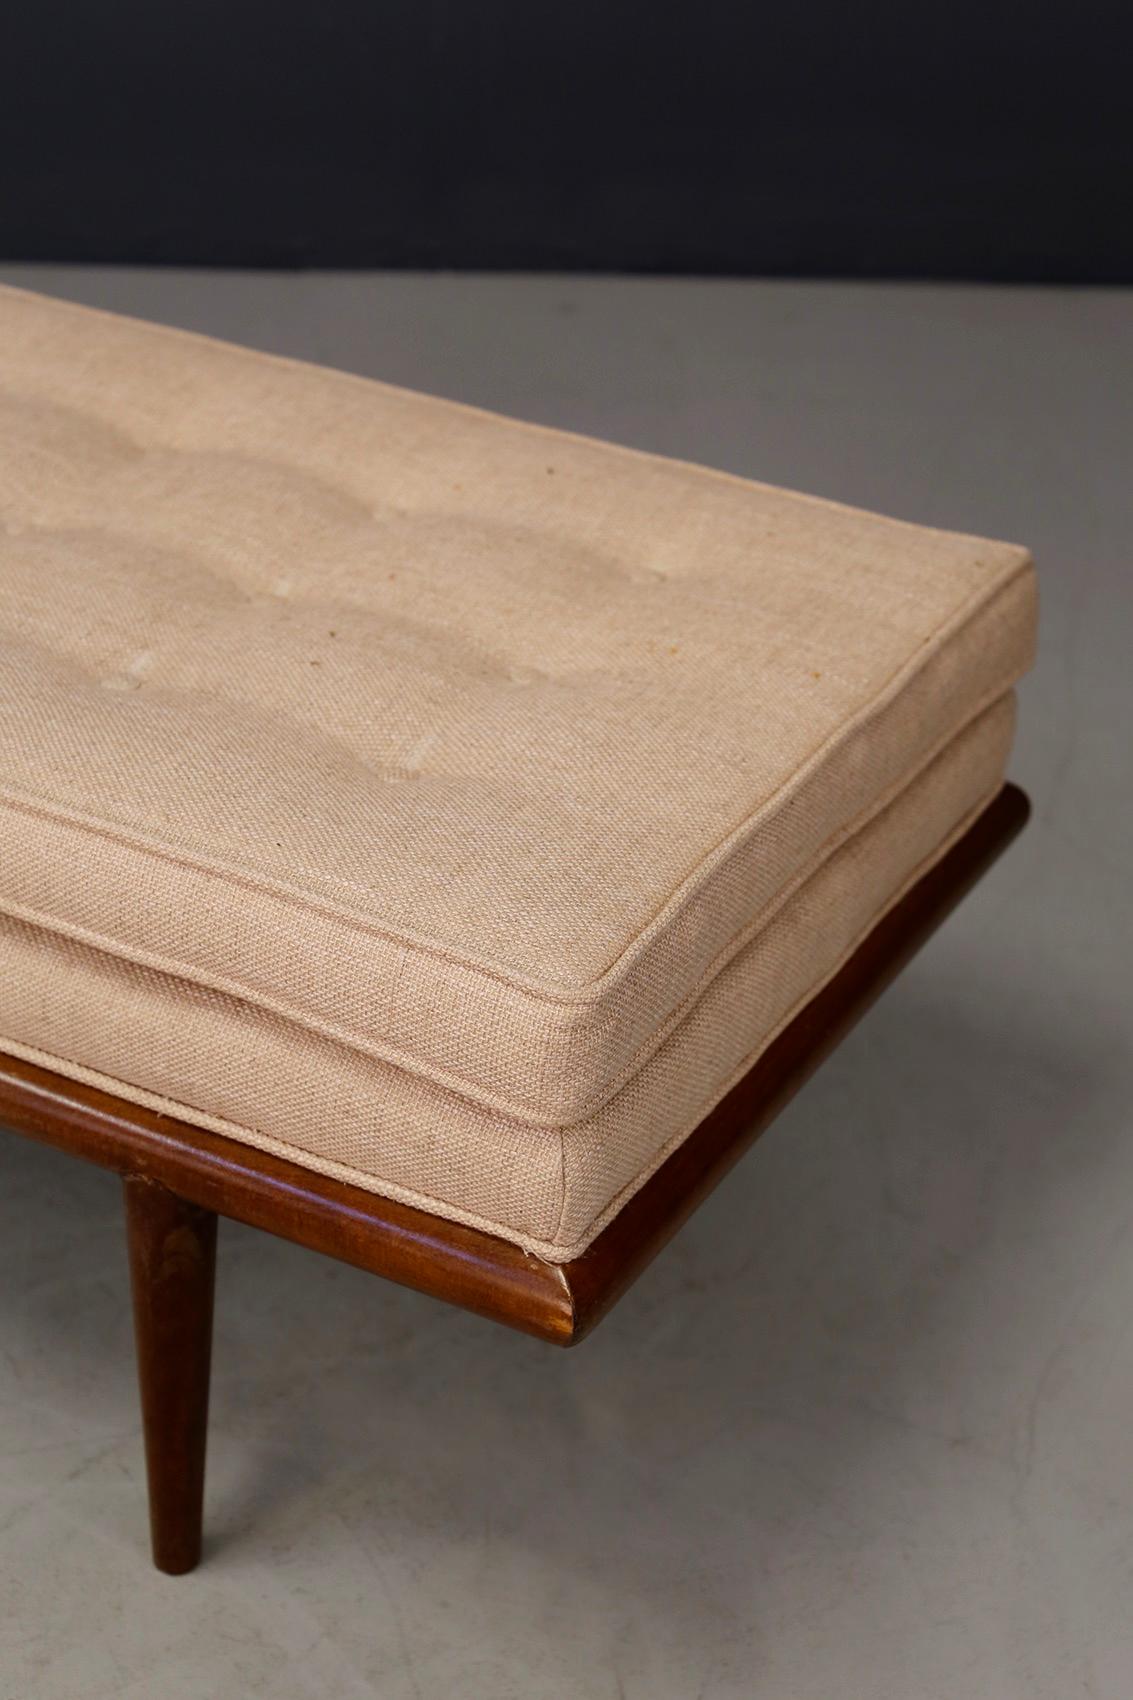 Elegant chaise lounge designed by American designer T.H. Robsjohn-Gibbings for Widdicomb Furniture Co., circa 1955. Impeccable finishes.
The chaise lounge have been restored. Its cover is in beige Italian cotton fabric. The structure is in walnut